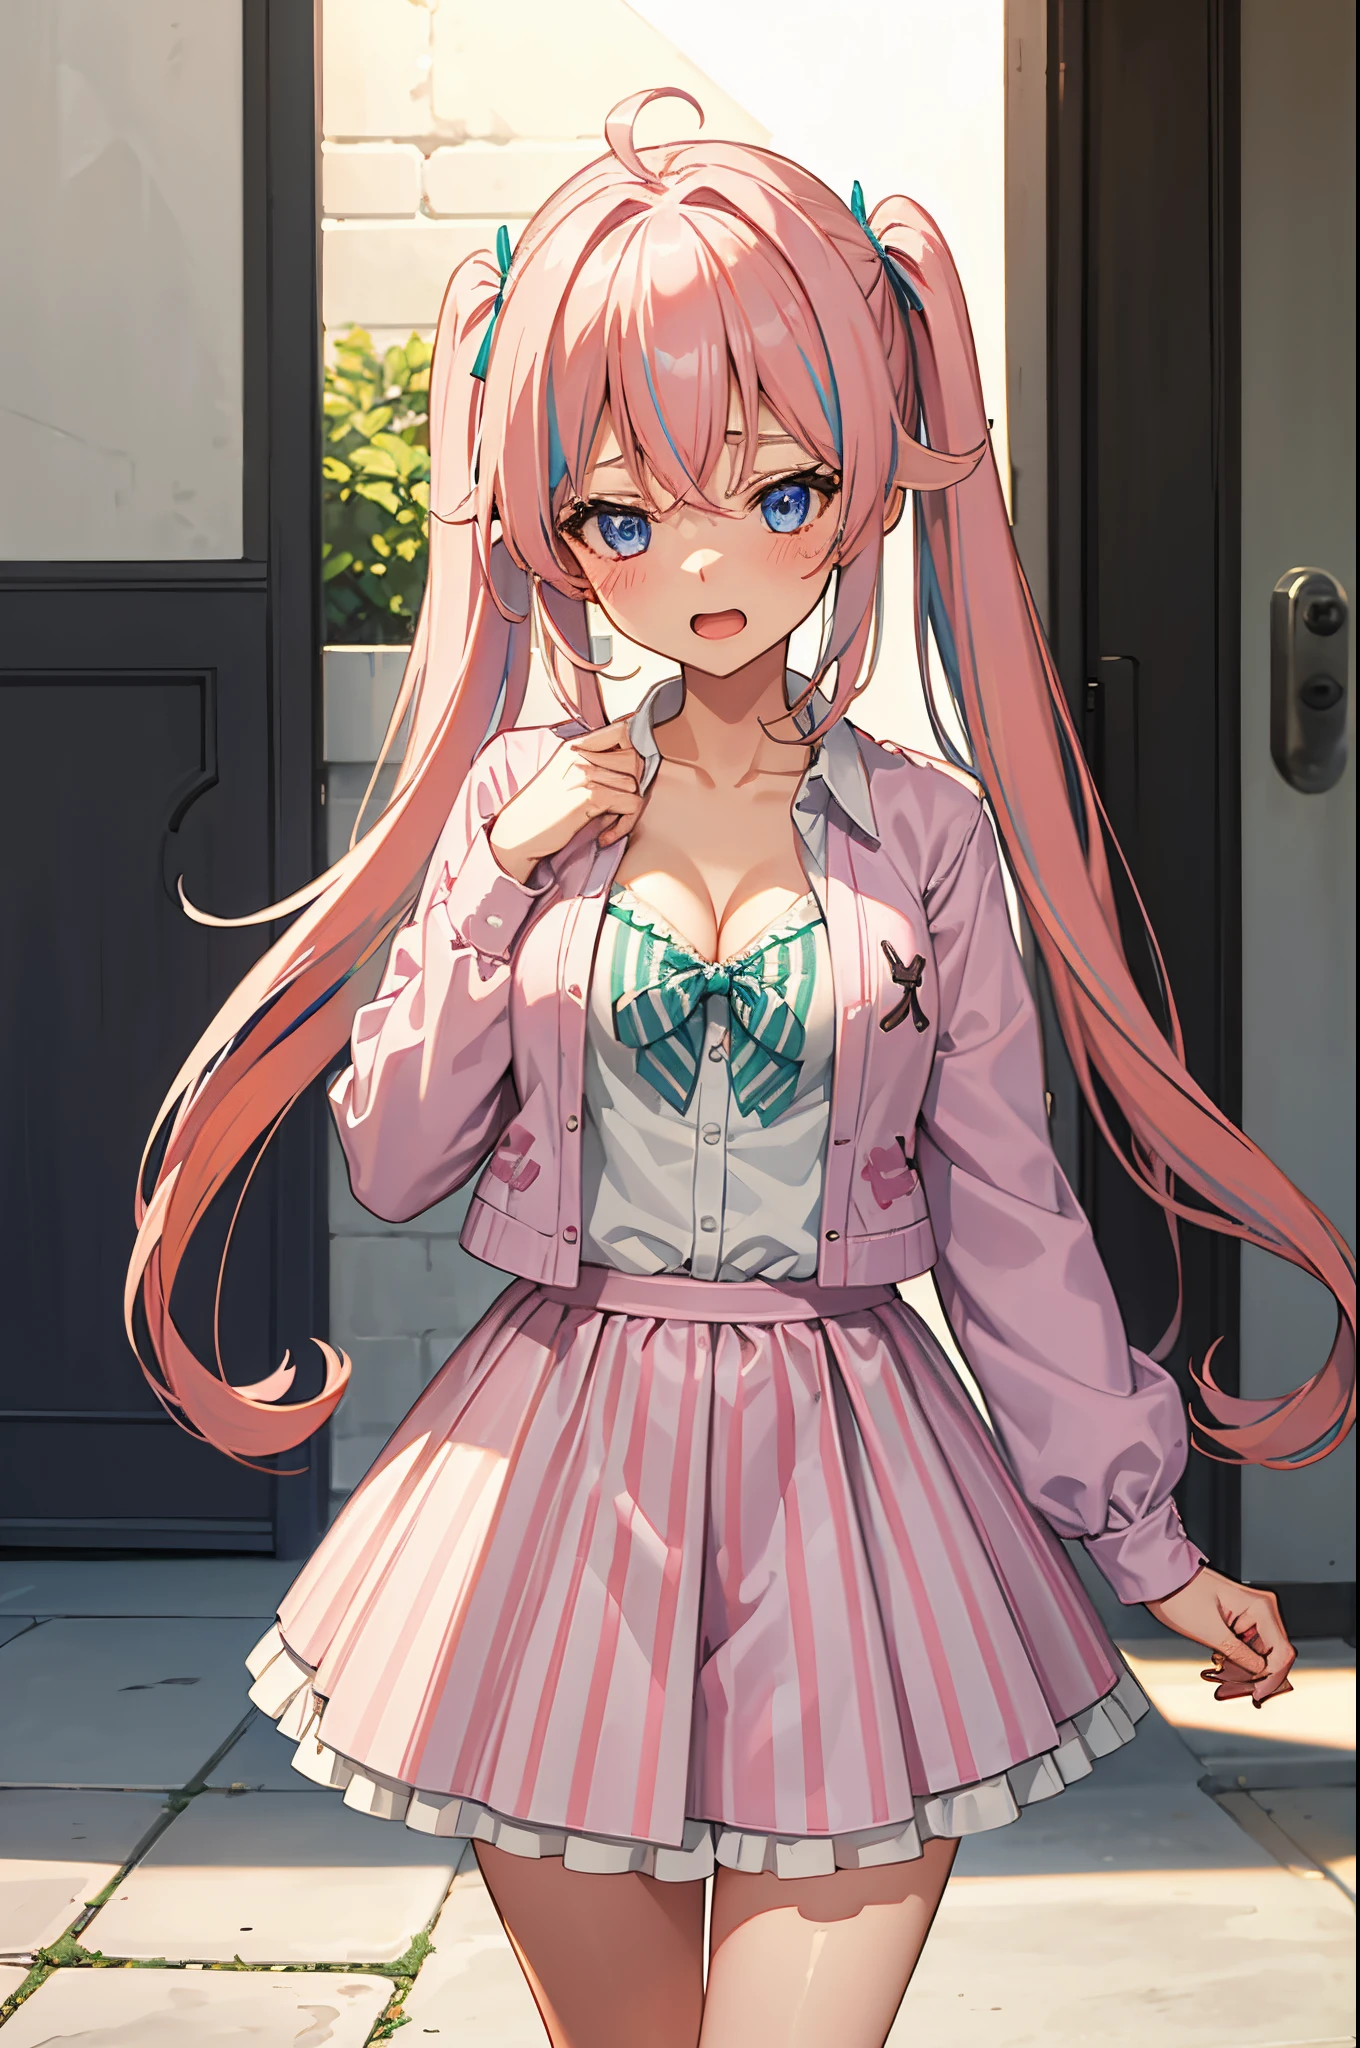 Anime girl with pink hair and blue eyes in a pink dress - SeaArt AI